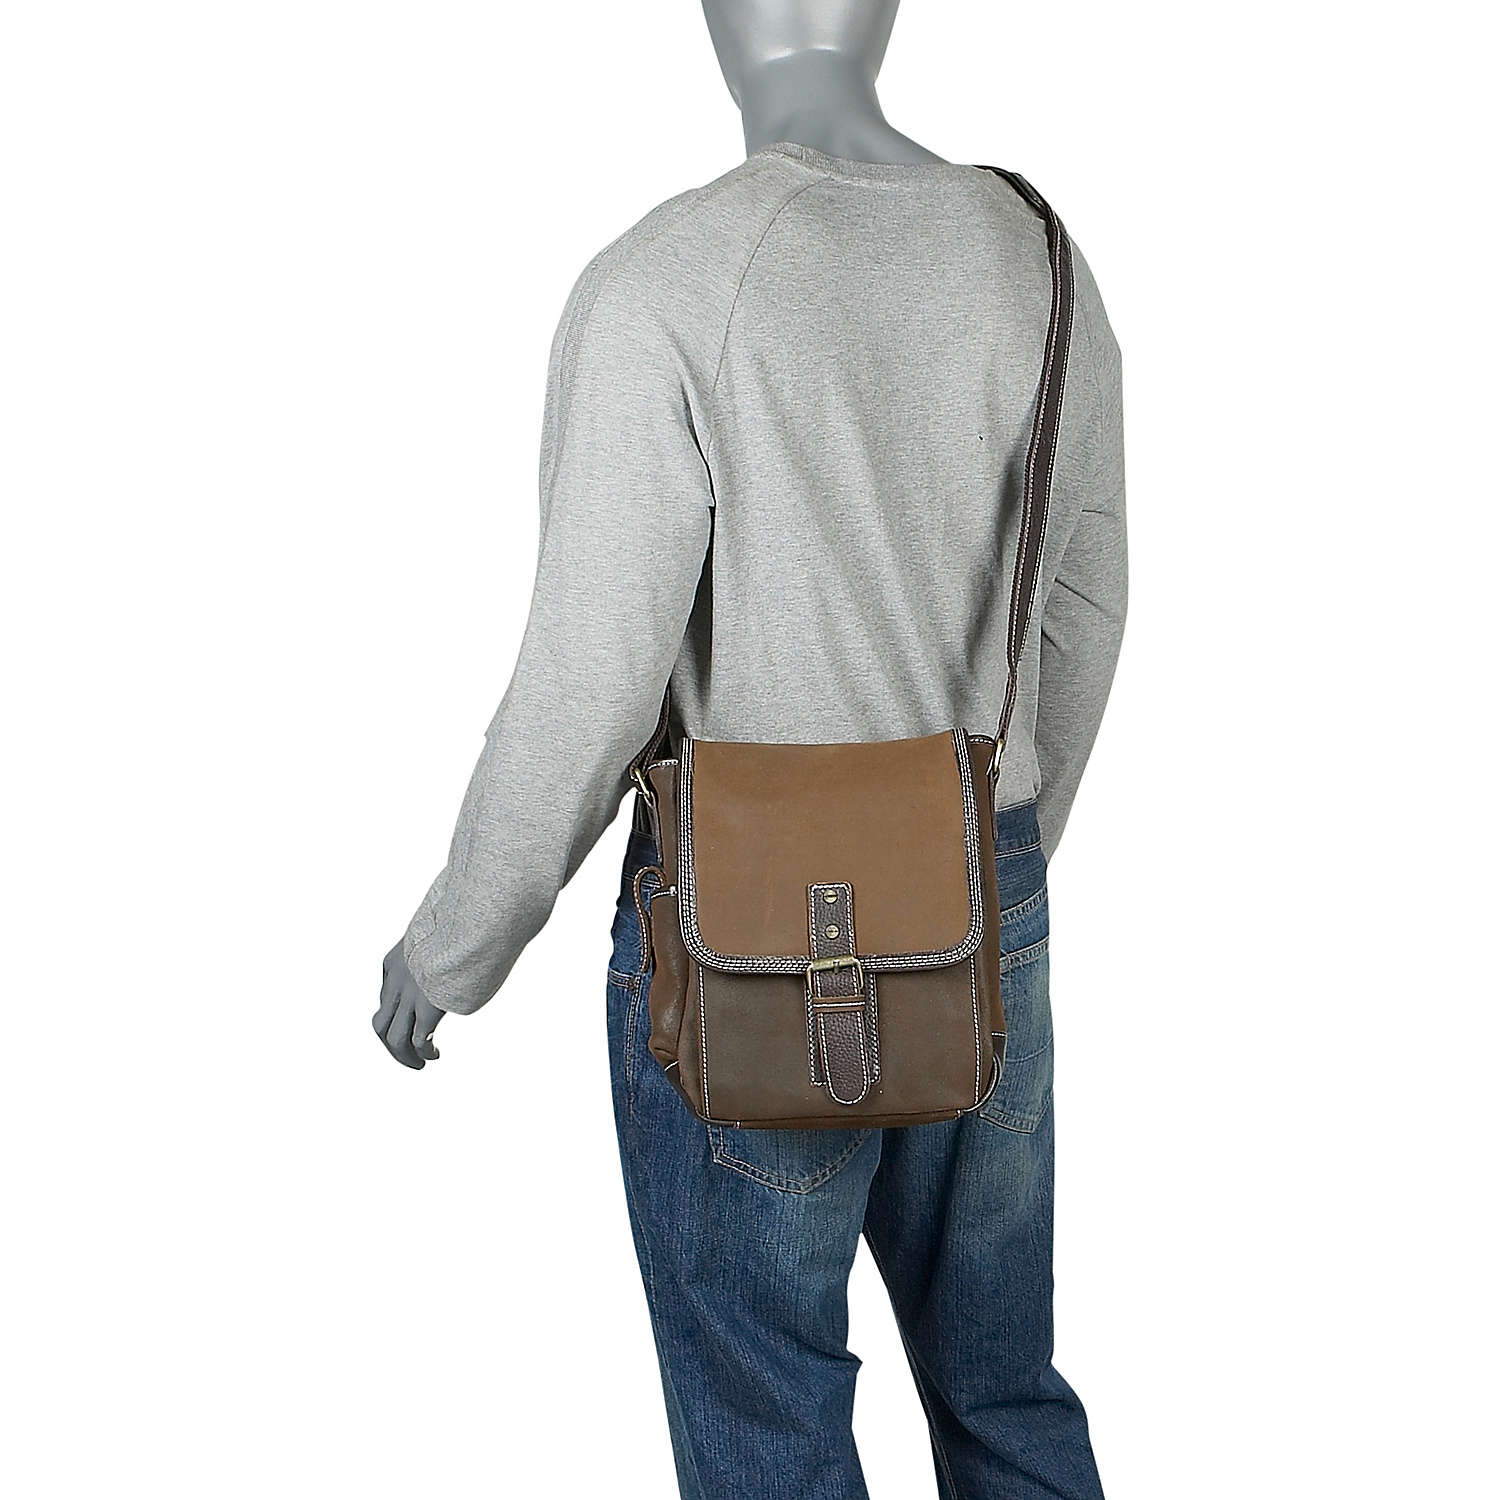 The Outback Sling iPad / Netbook Messenger